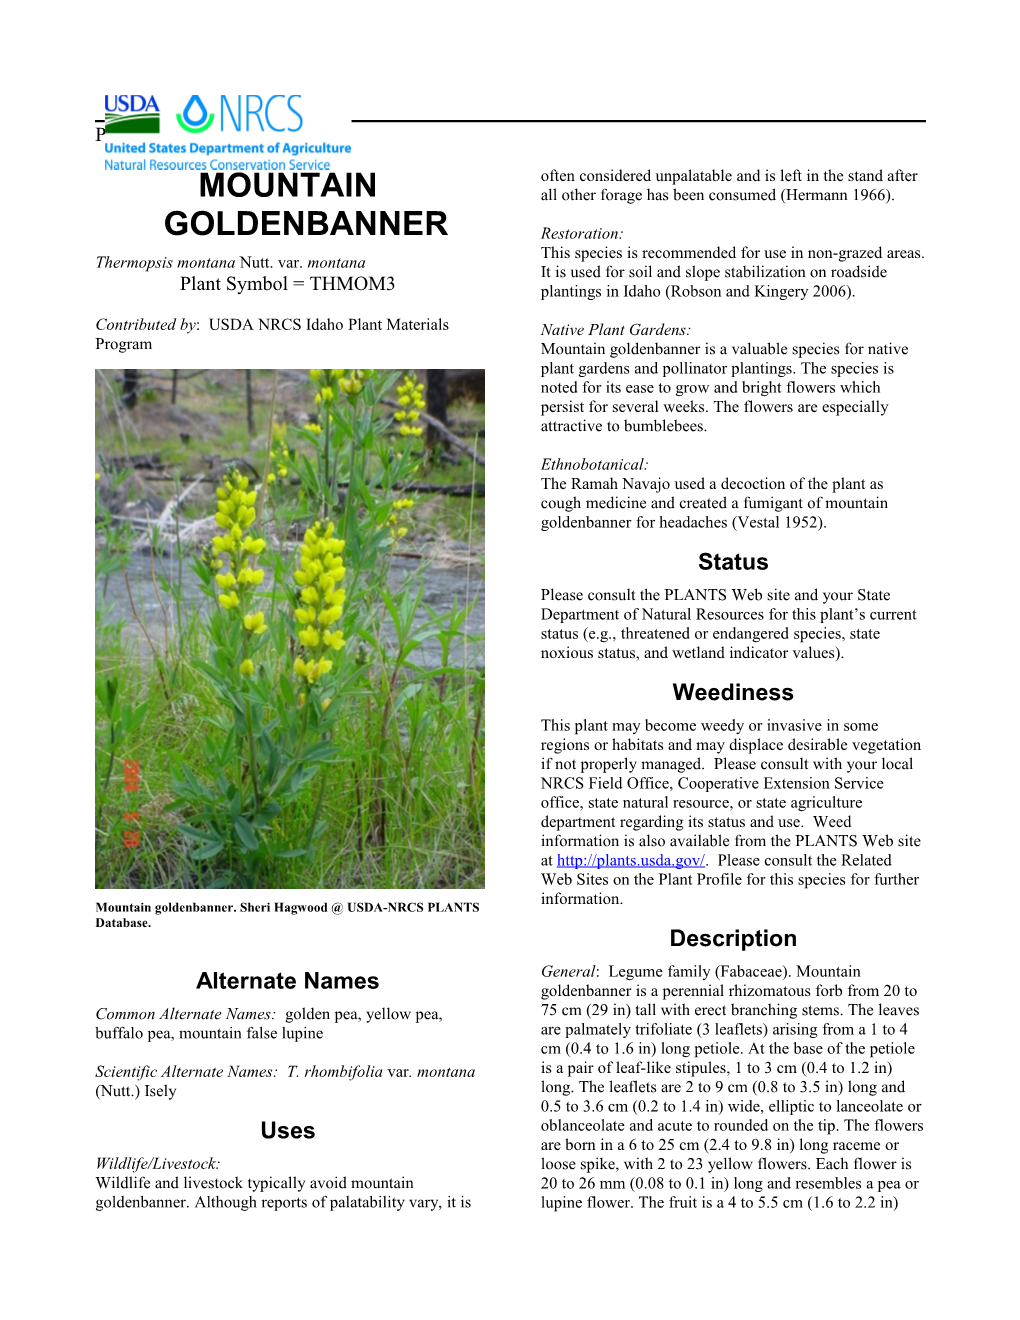 Plant Guide for Mountain Goldenbanner (Thermopsis Montana)